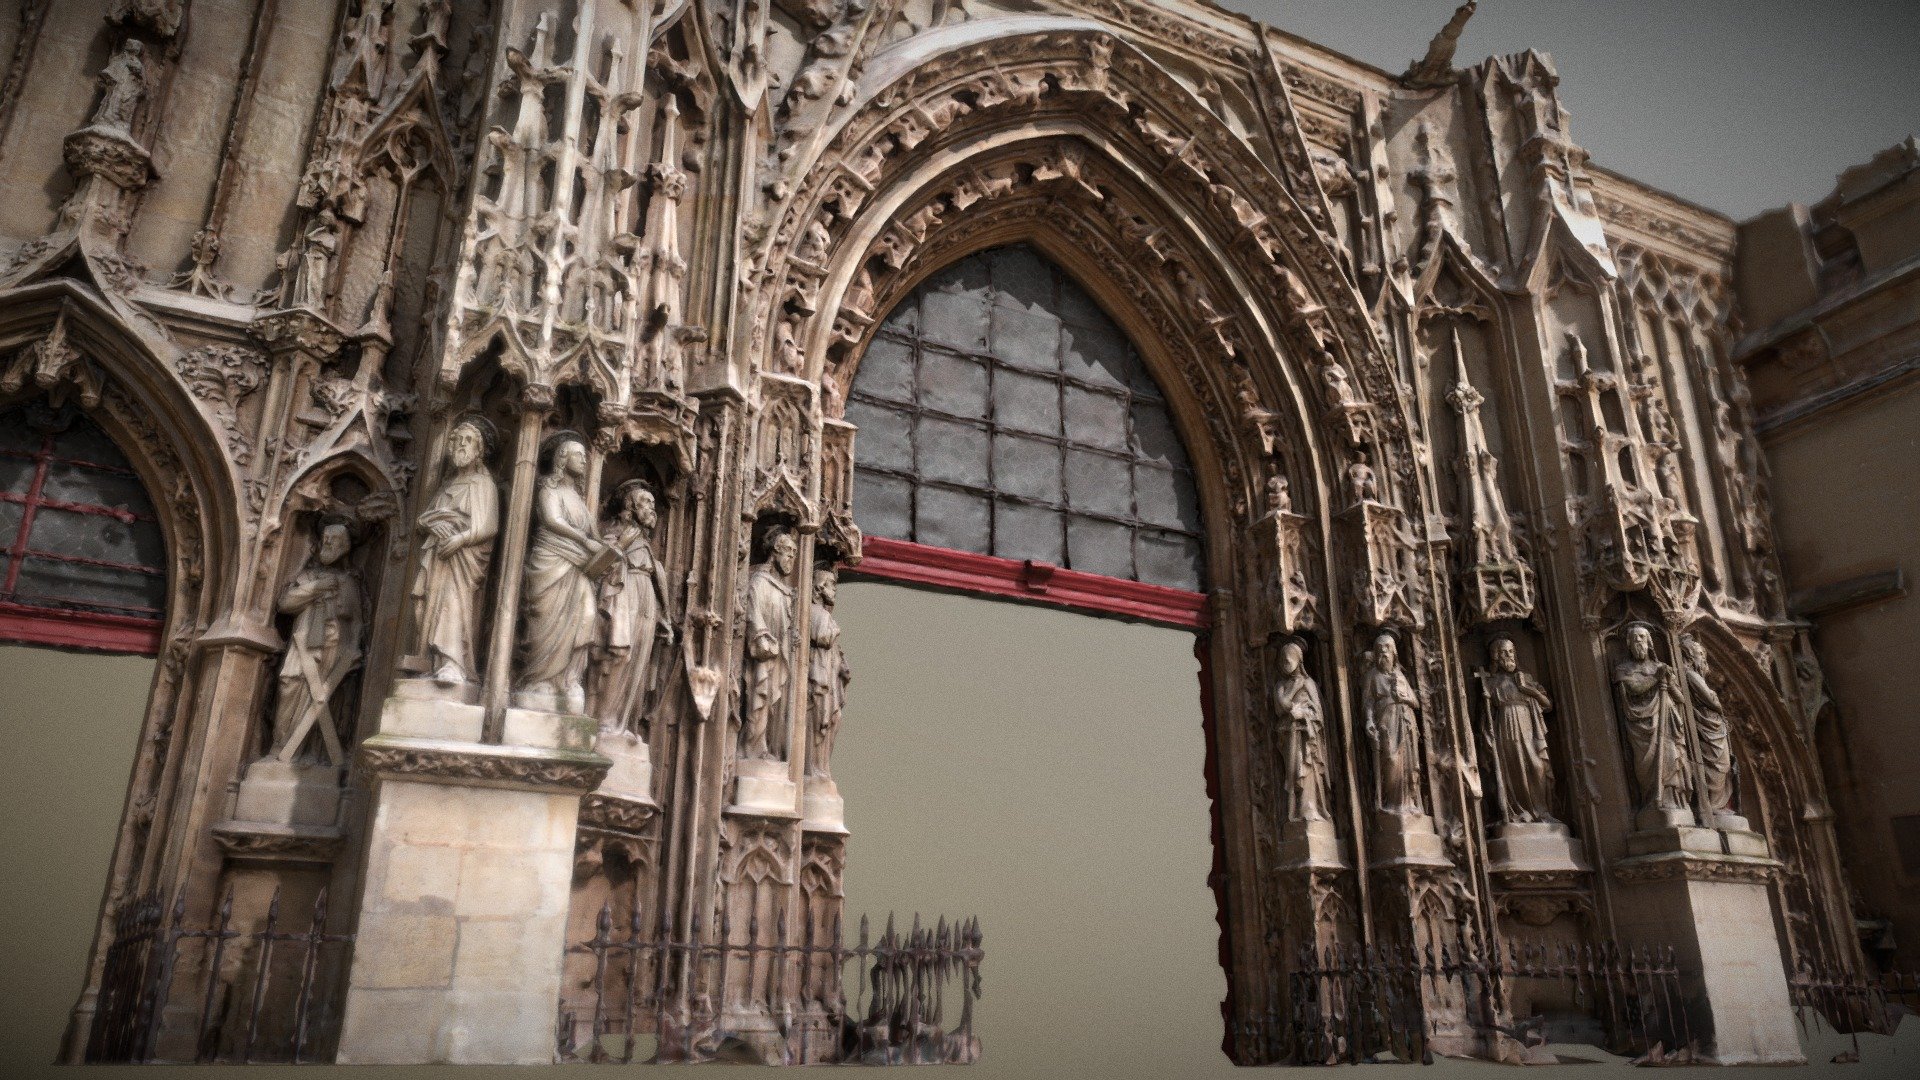 The church Saint-Merri is a Catholic church located near the center Georges-Pompidou at the crossroads of rue Saint-Martin and rue de la Verrerie in the 4th district of Paris 3d model